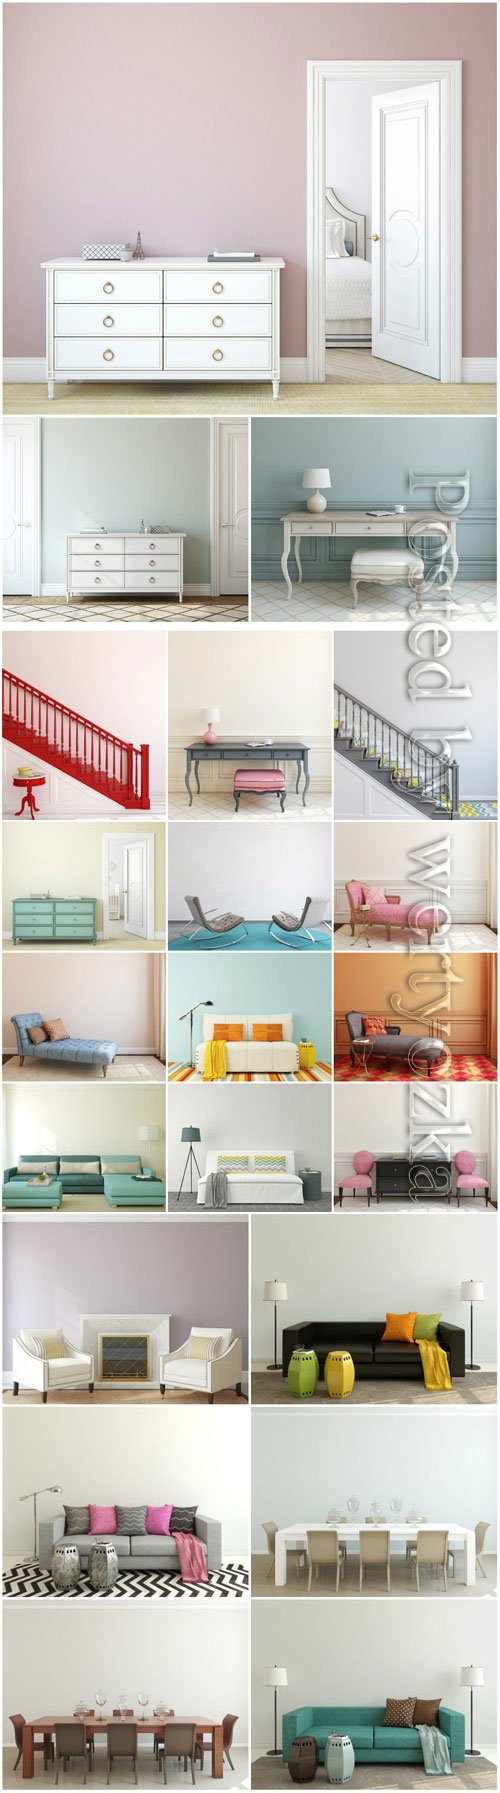 Modern interior, sofas and armchairs stock photo